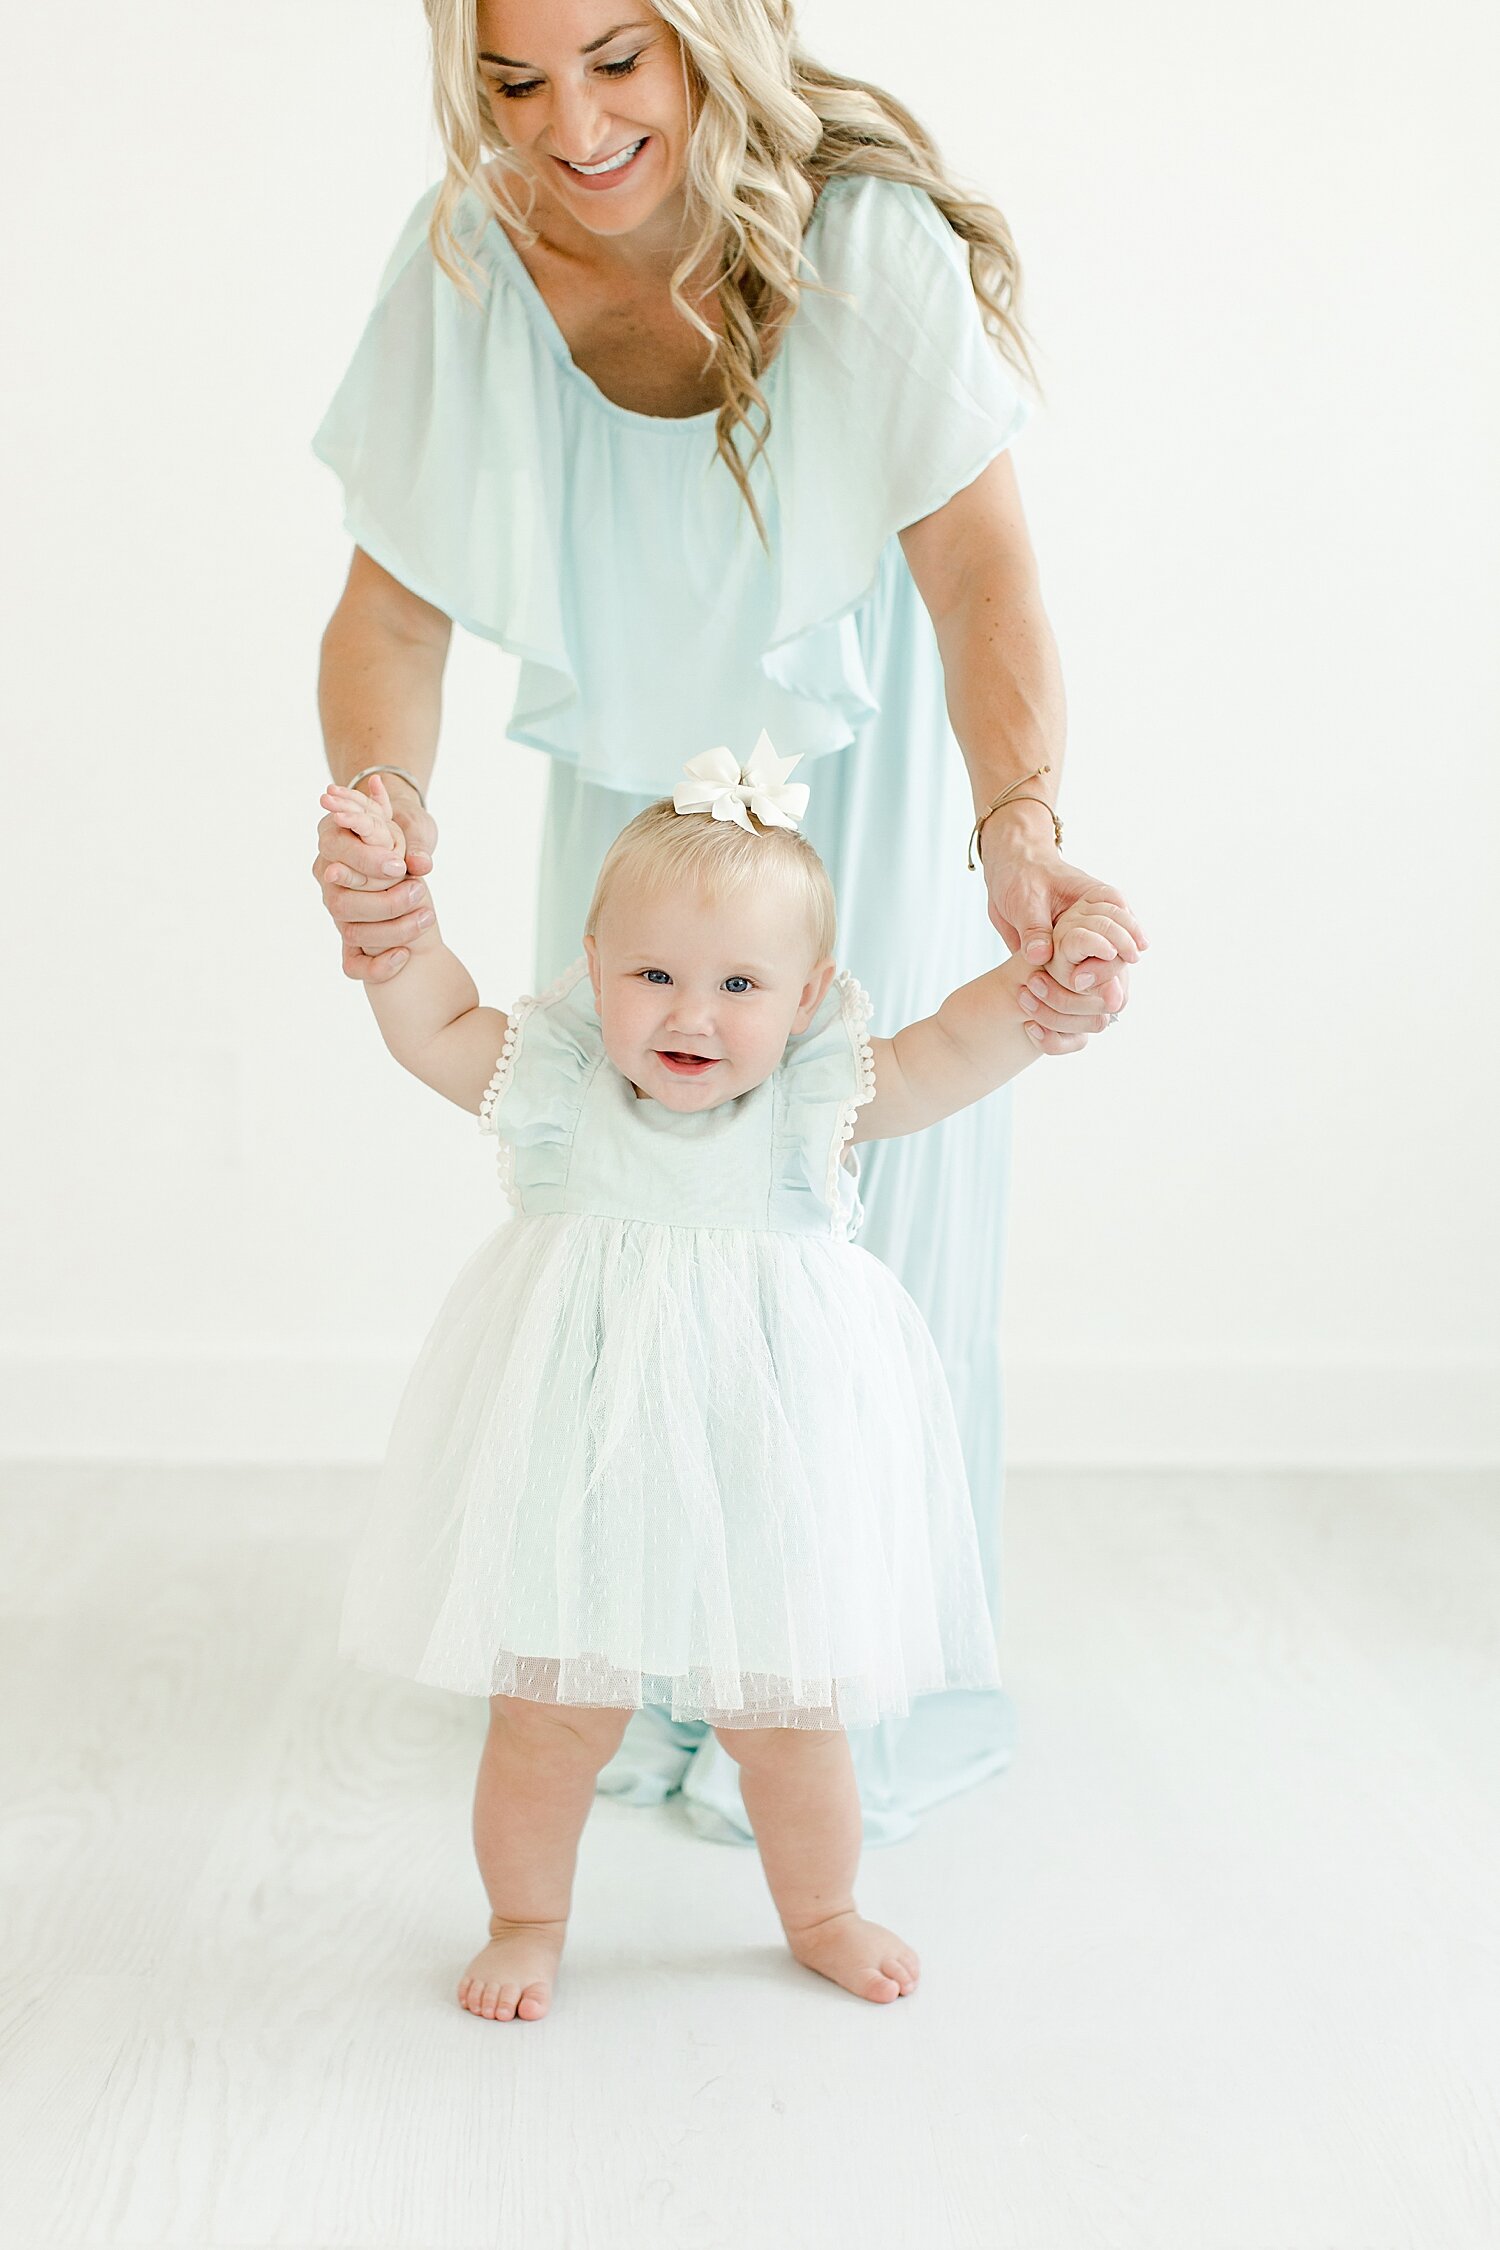 Mommy and me session with 8 month old baby girl. Photos by Kristin Wood Photography.